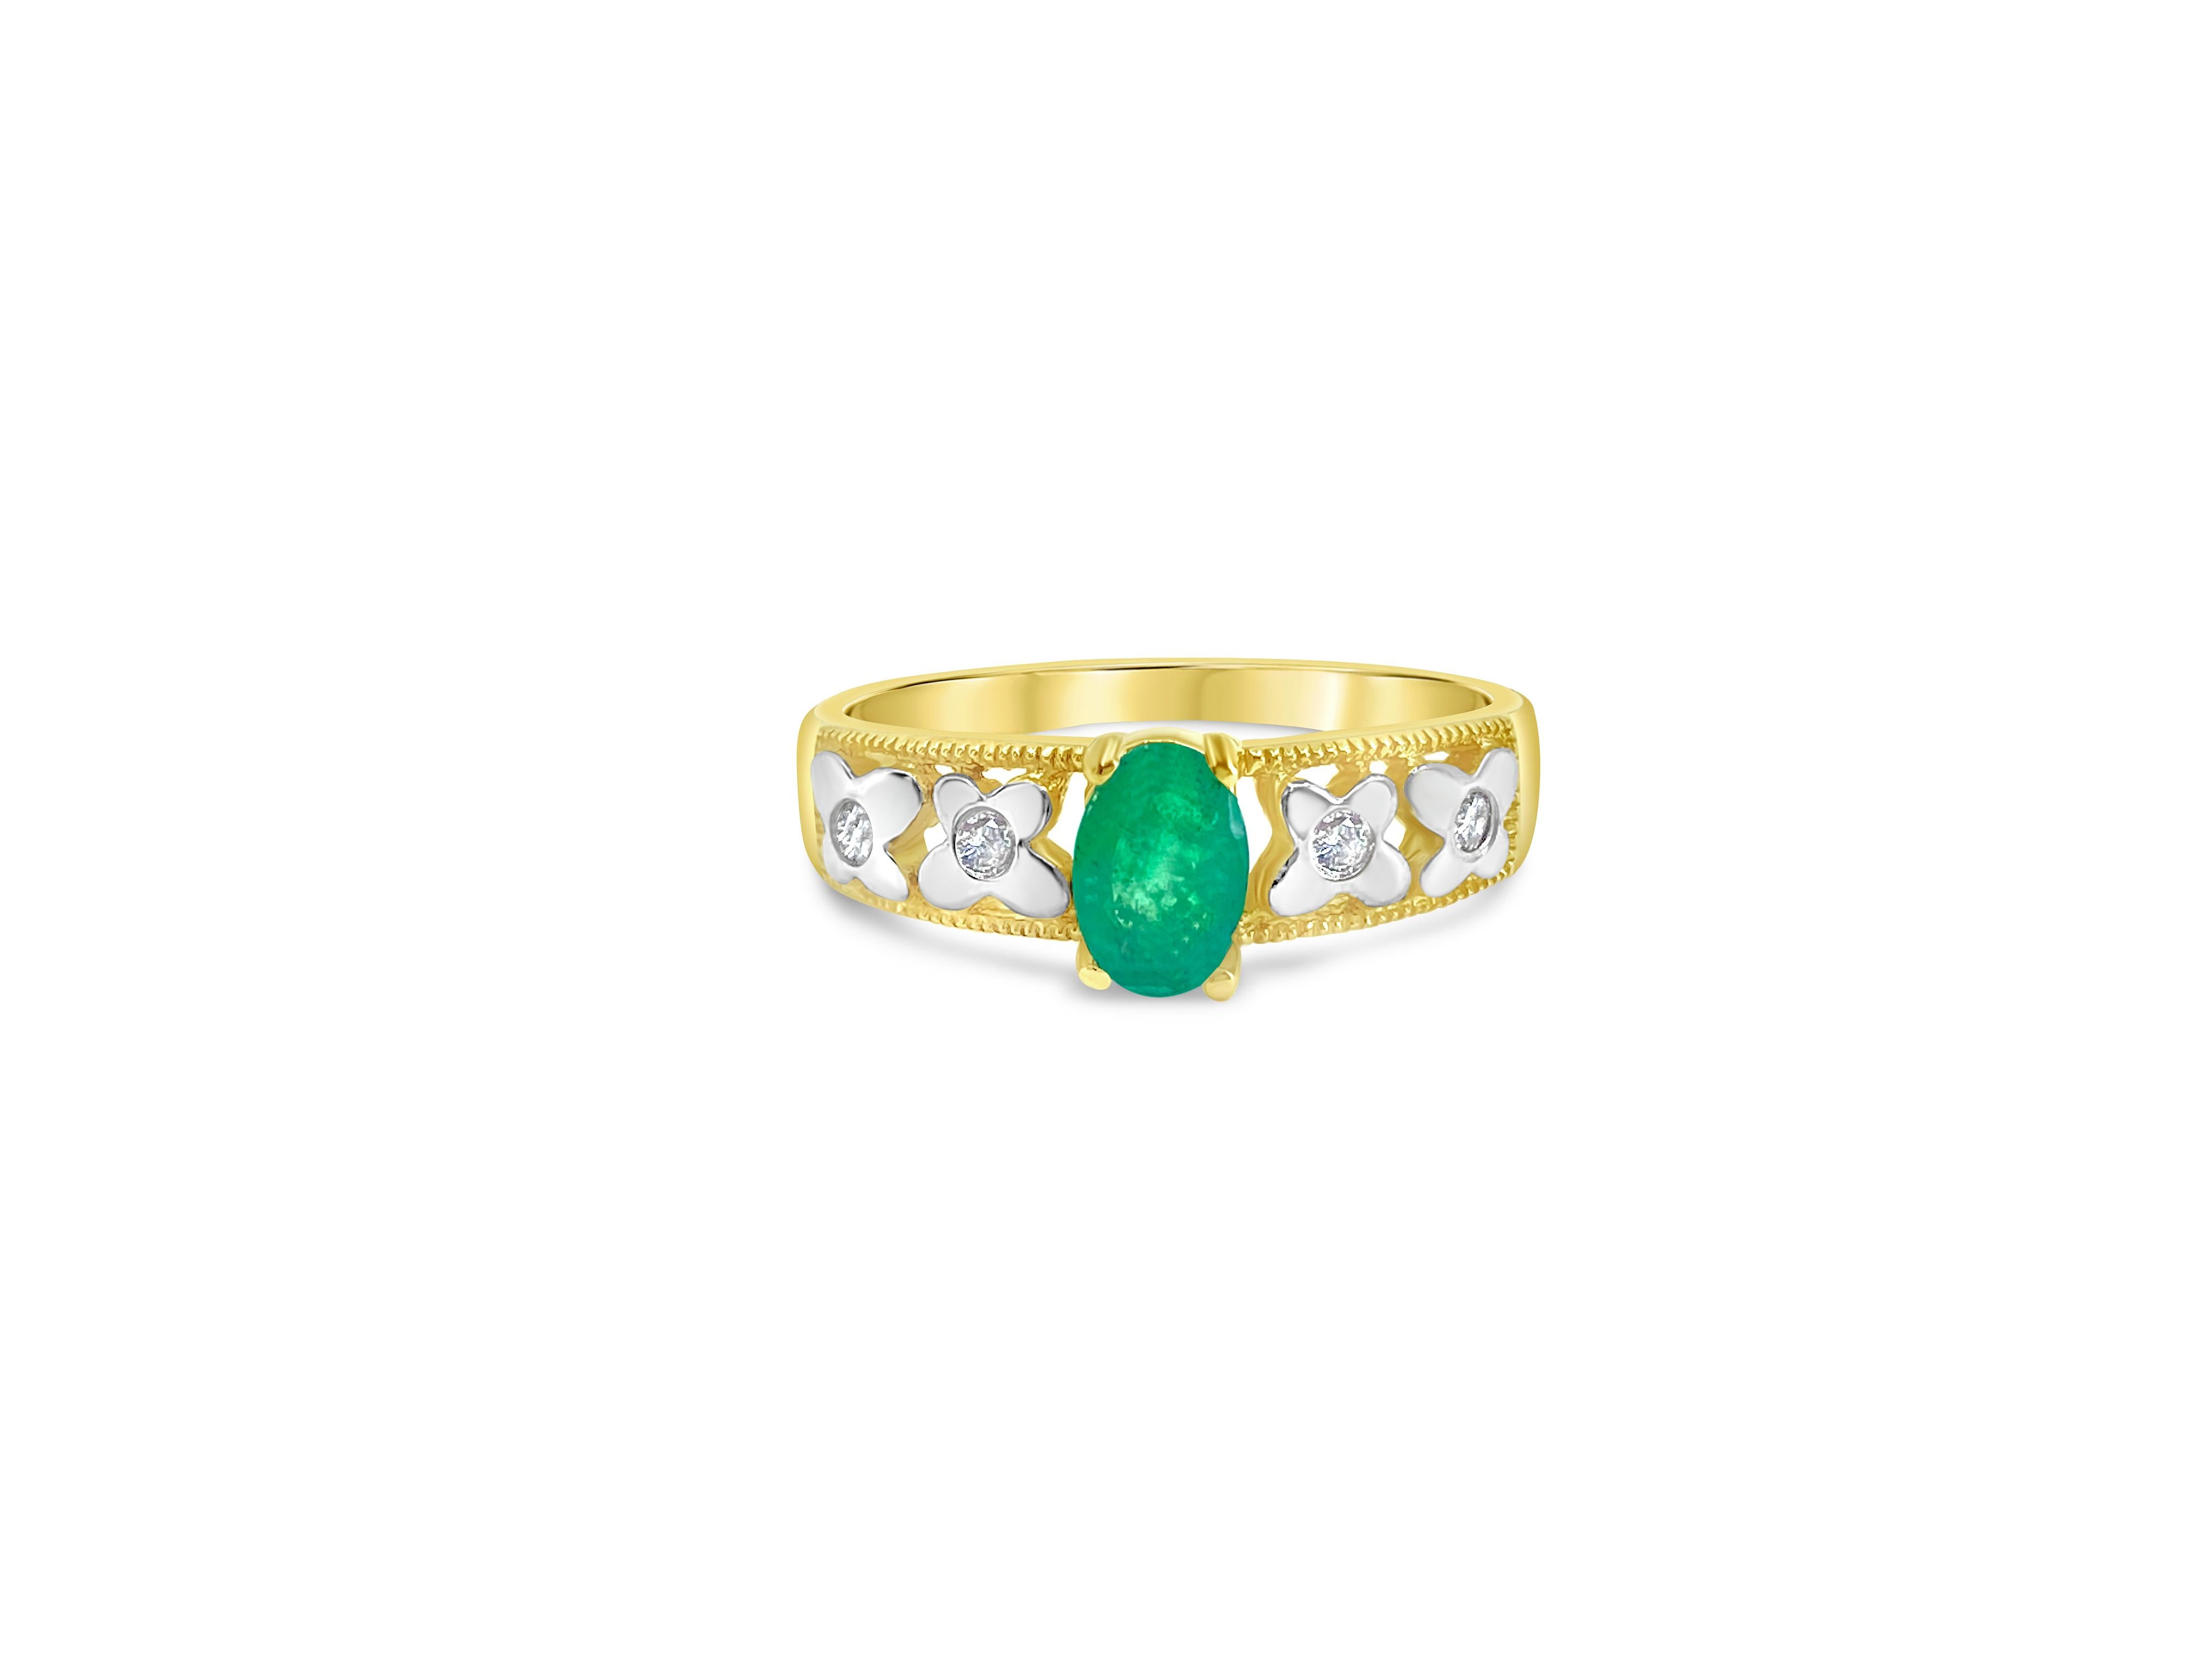 Introducing this captivating cocktail ring crafted from 10k yellow and white gold, featuring a stunning 2.55 carat natural earth-mined emerald as the centerpiece, showcasing excellent hue and saturation. Adorned with a total of 0.15 carats of side